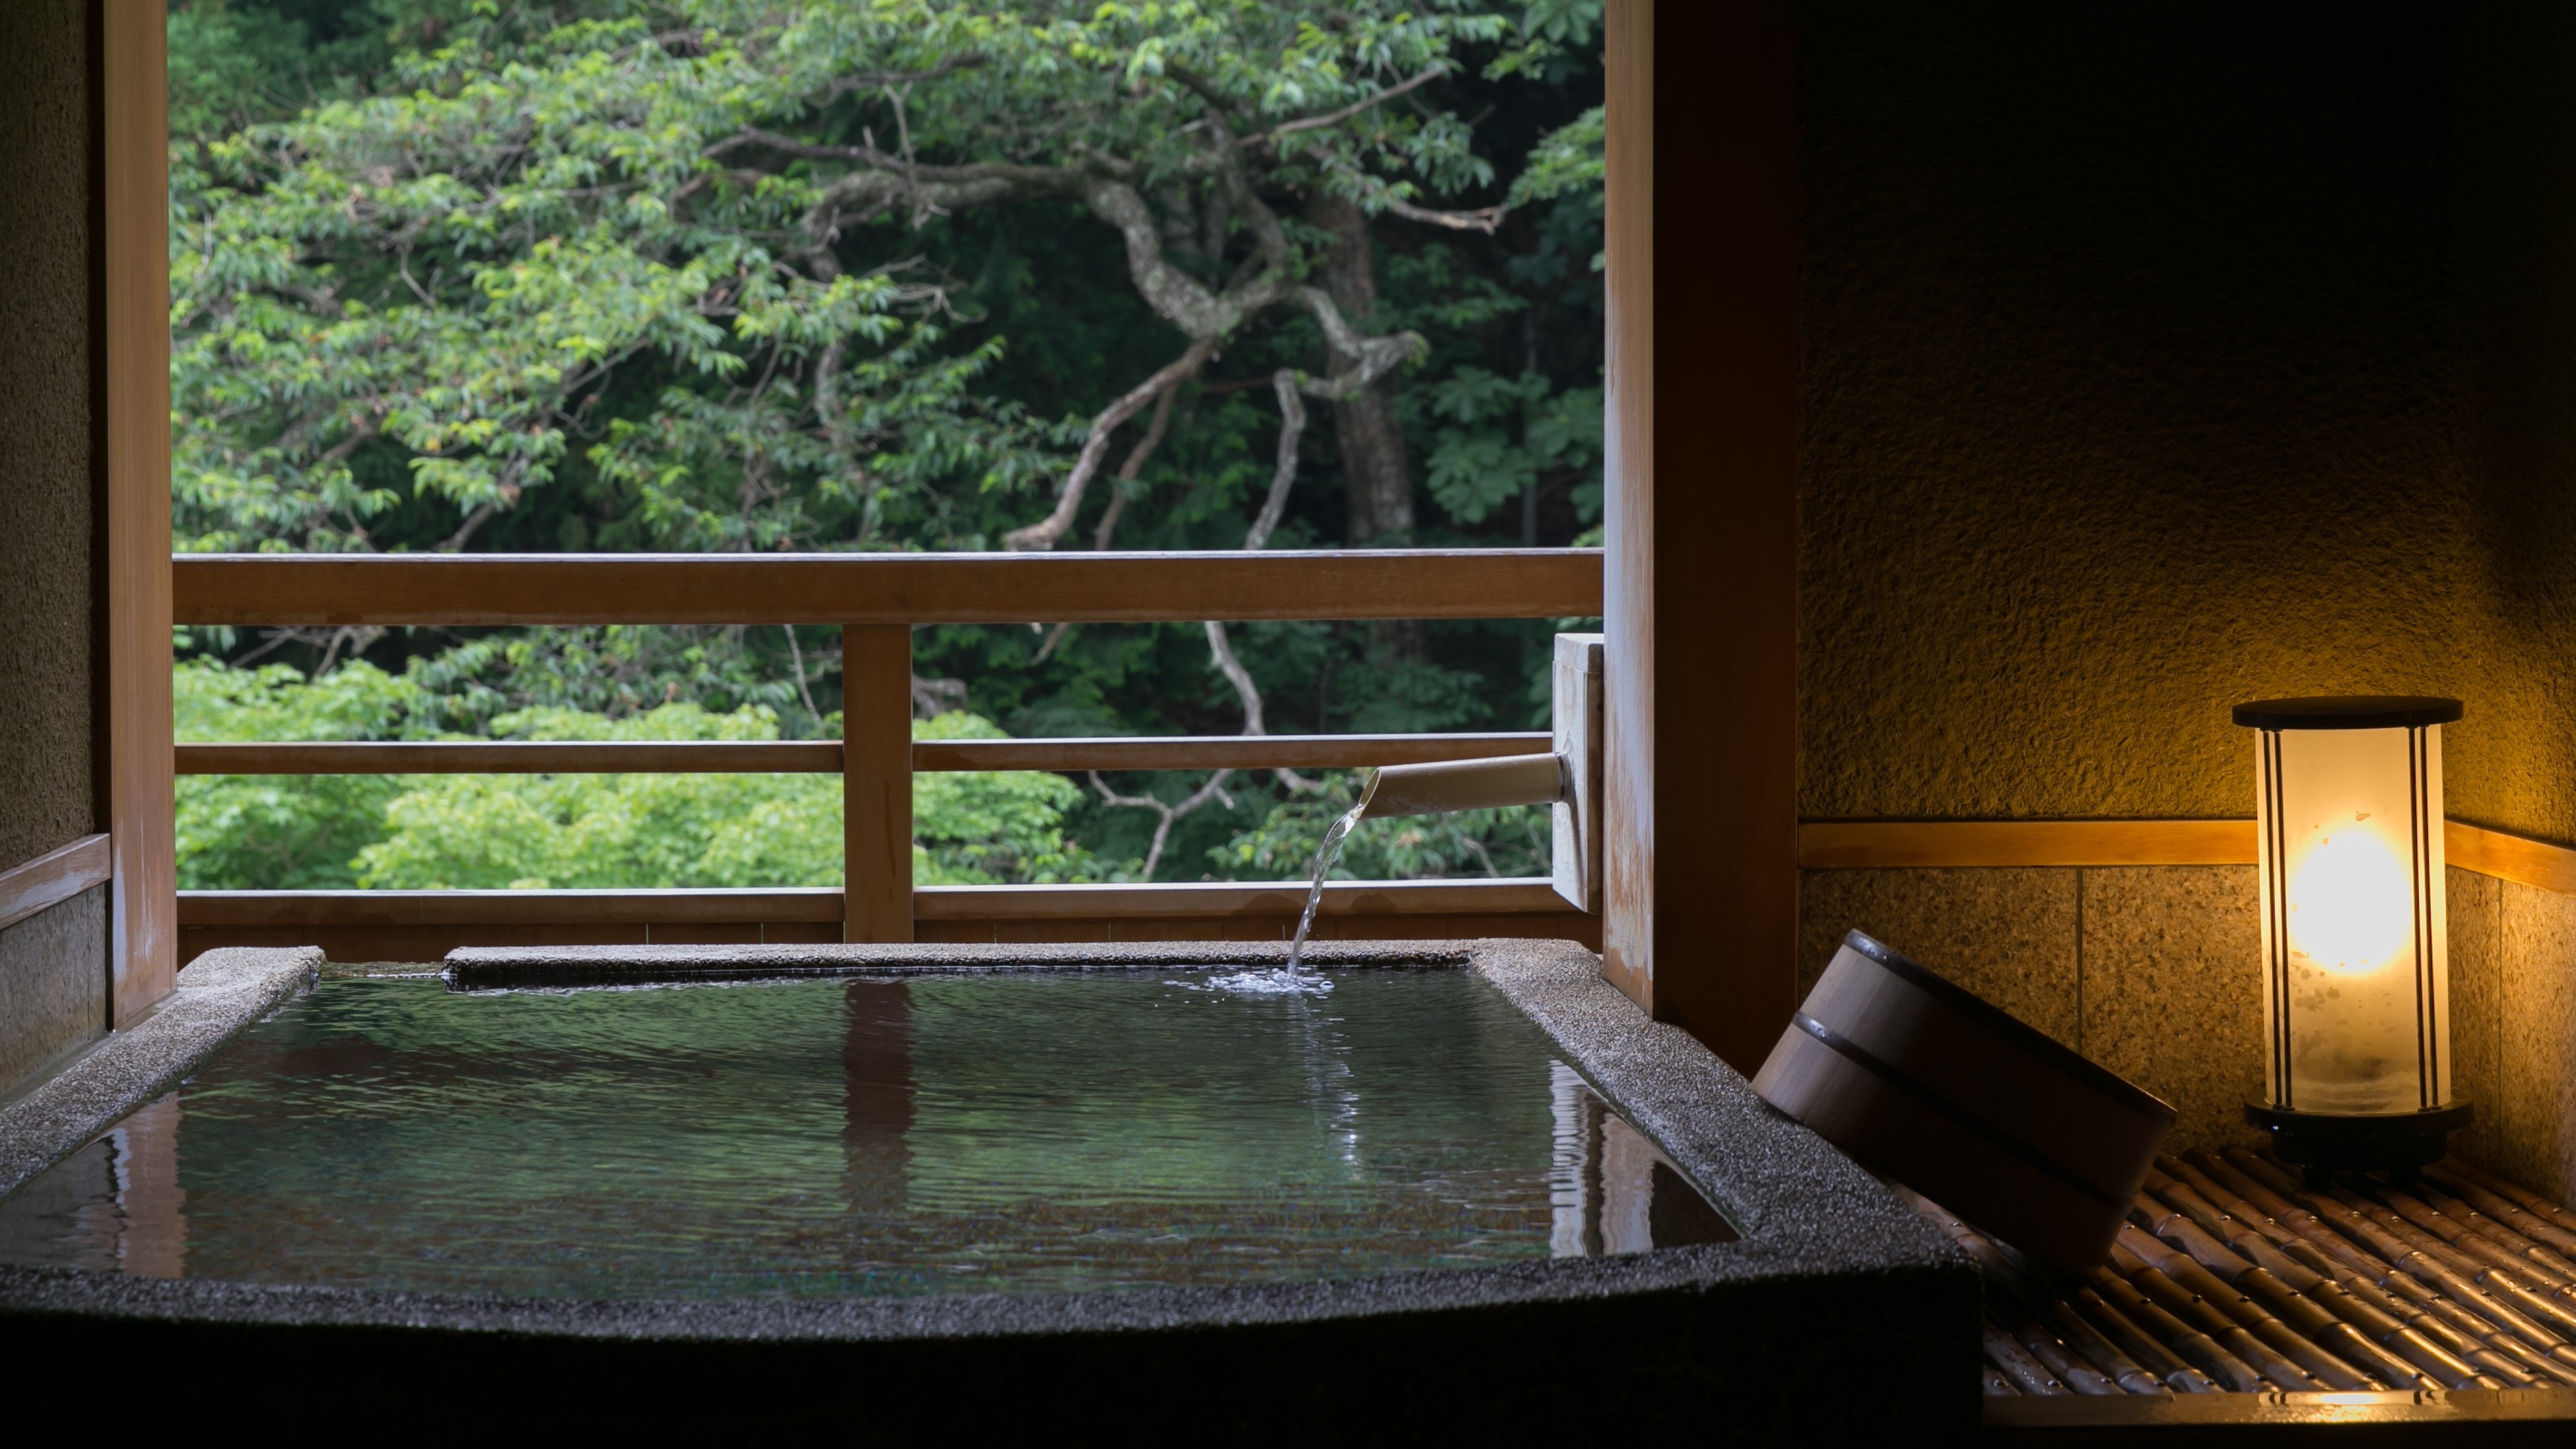 ・ All open-air baths in Hagi and rooms are 100% sourced from the source.